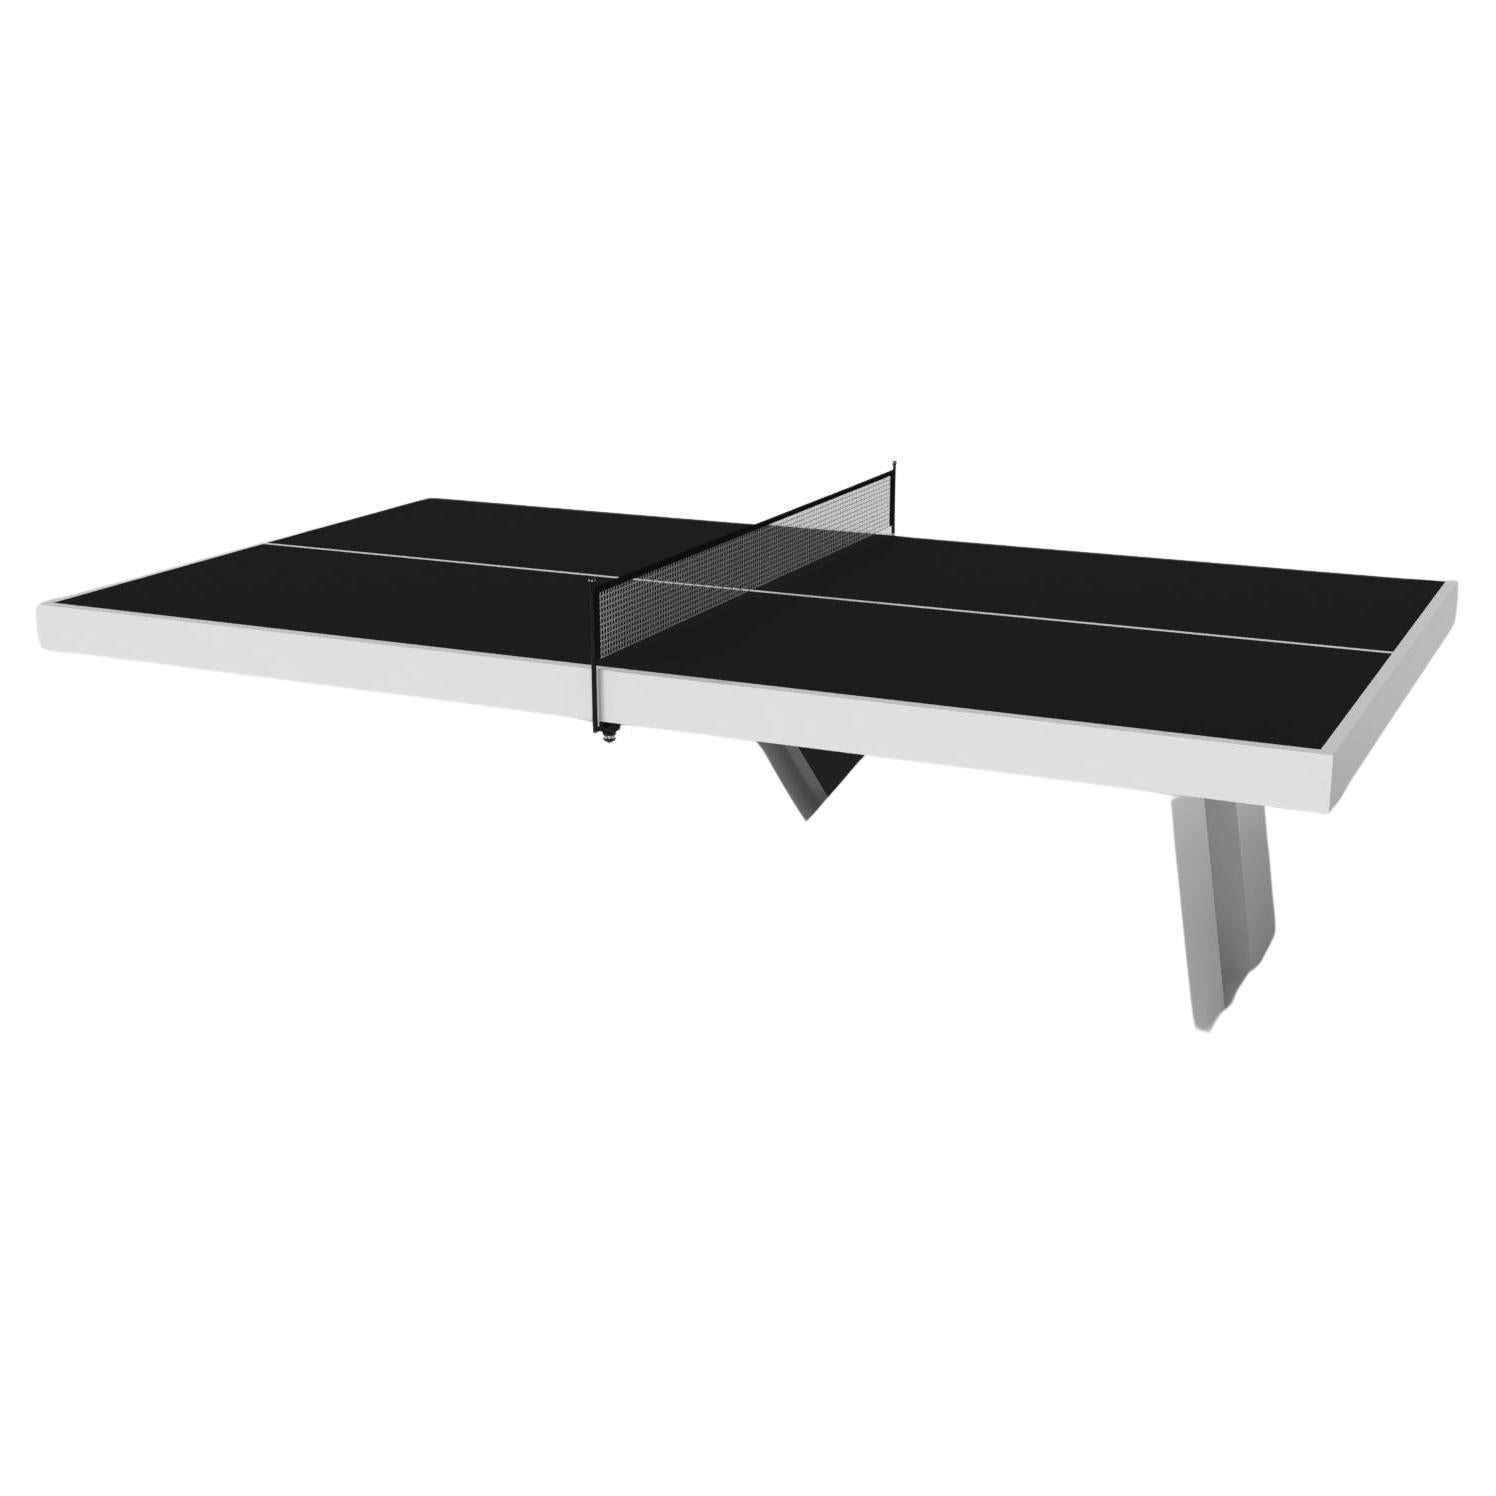 Elevate Customs Stilt Tennis Table / Solid White Maple Wood in 9' - Made in USA For Sale